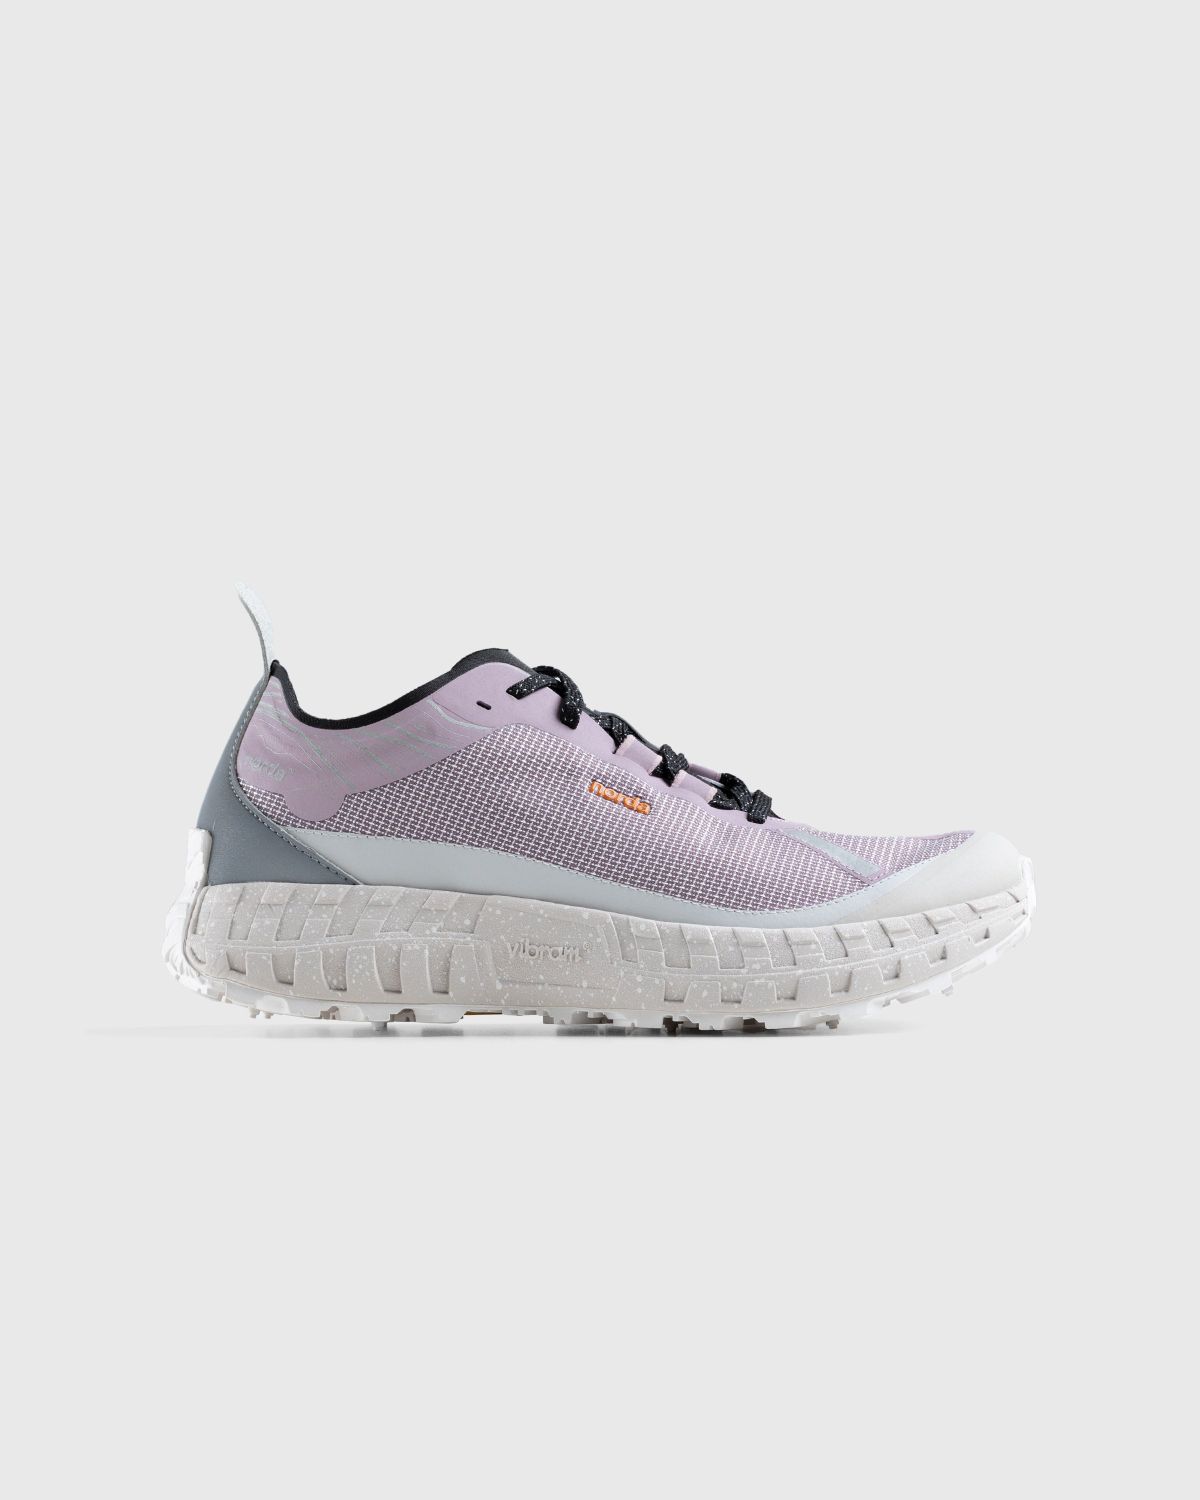 Norda – 001 W LTD Edition Lilac - Low Top Sneakers - Purple - Image 1